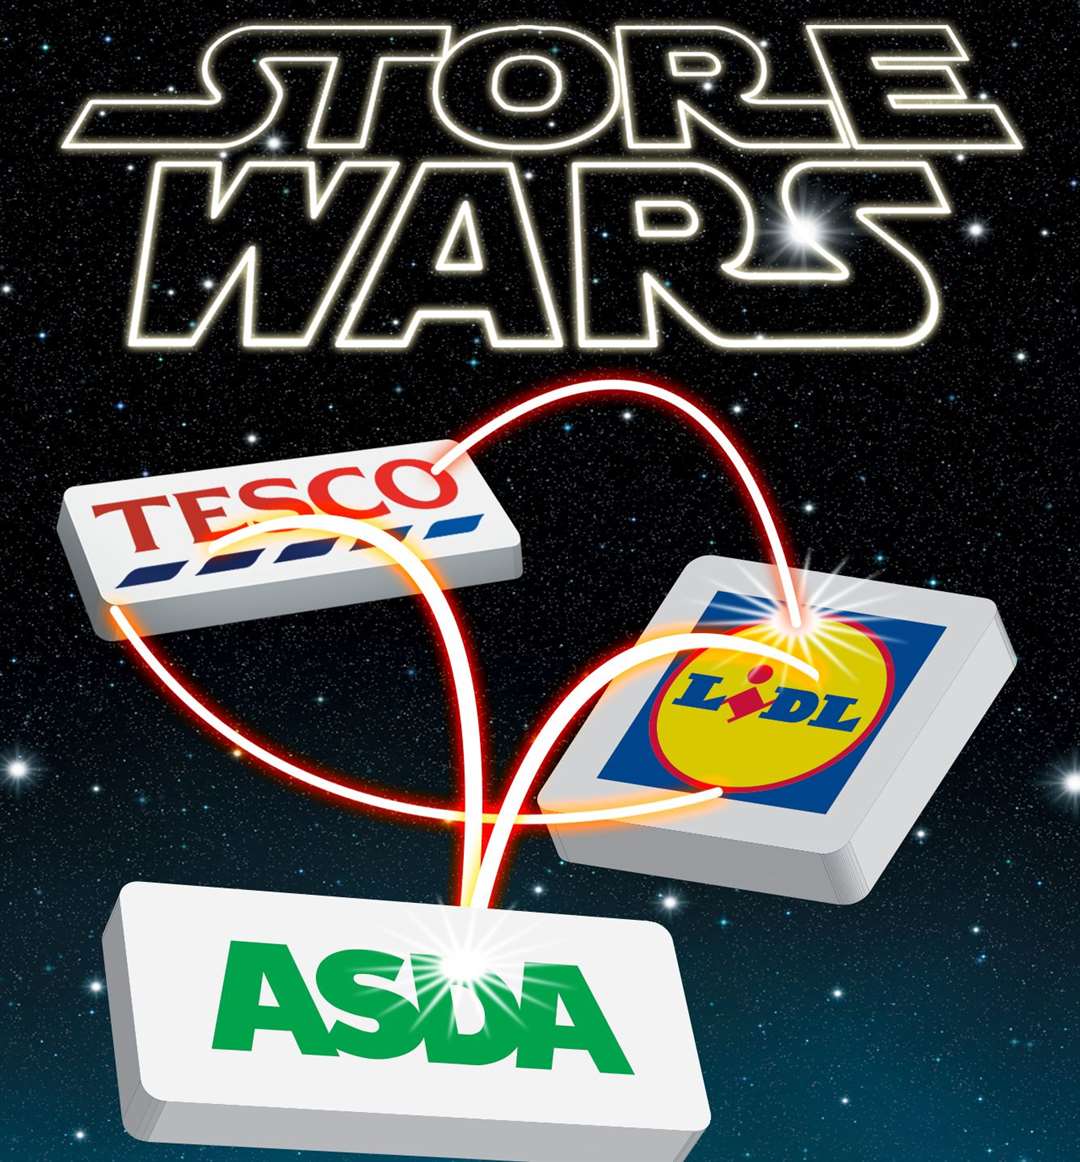 Store Wars as Tesco and Asda oppose Lidl proposals in Gillingham